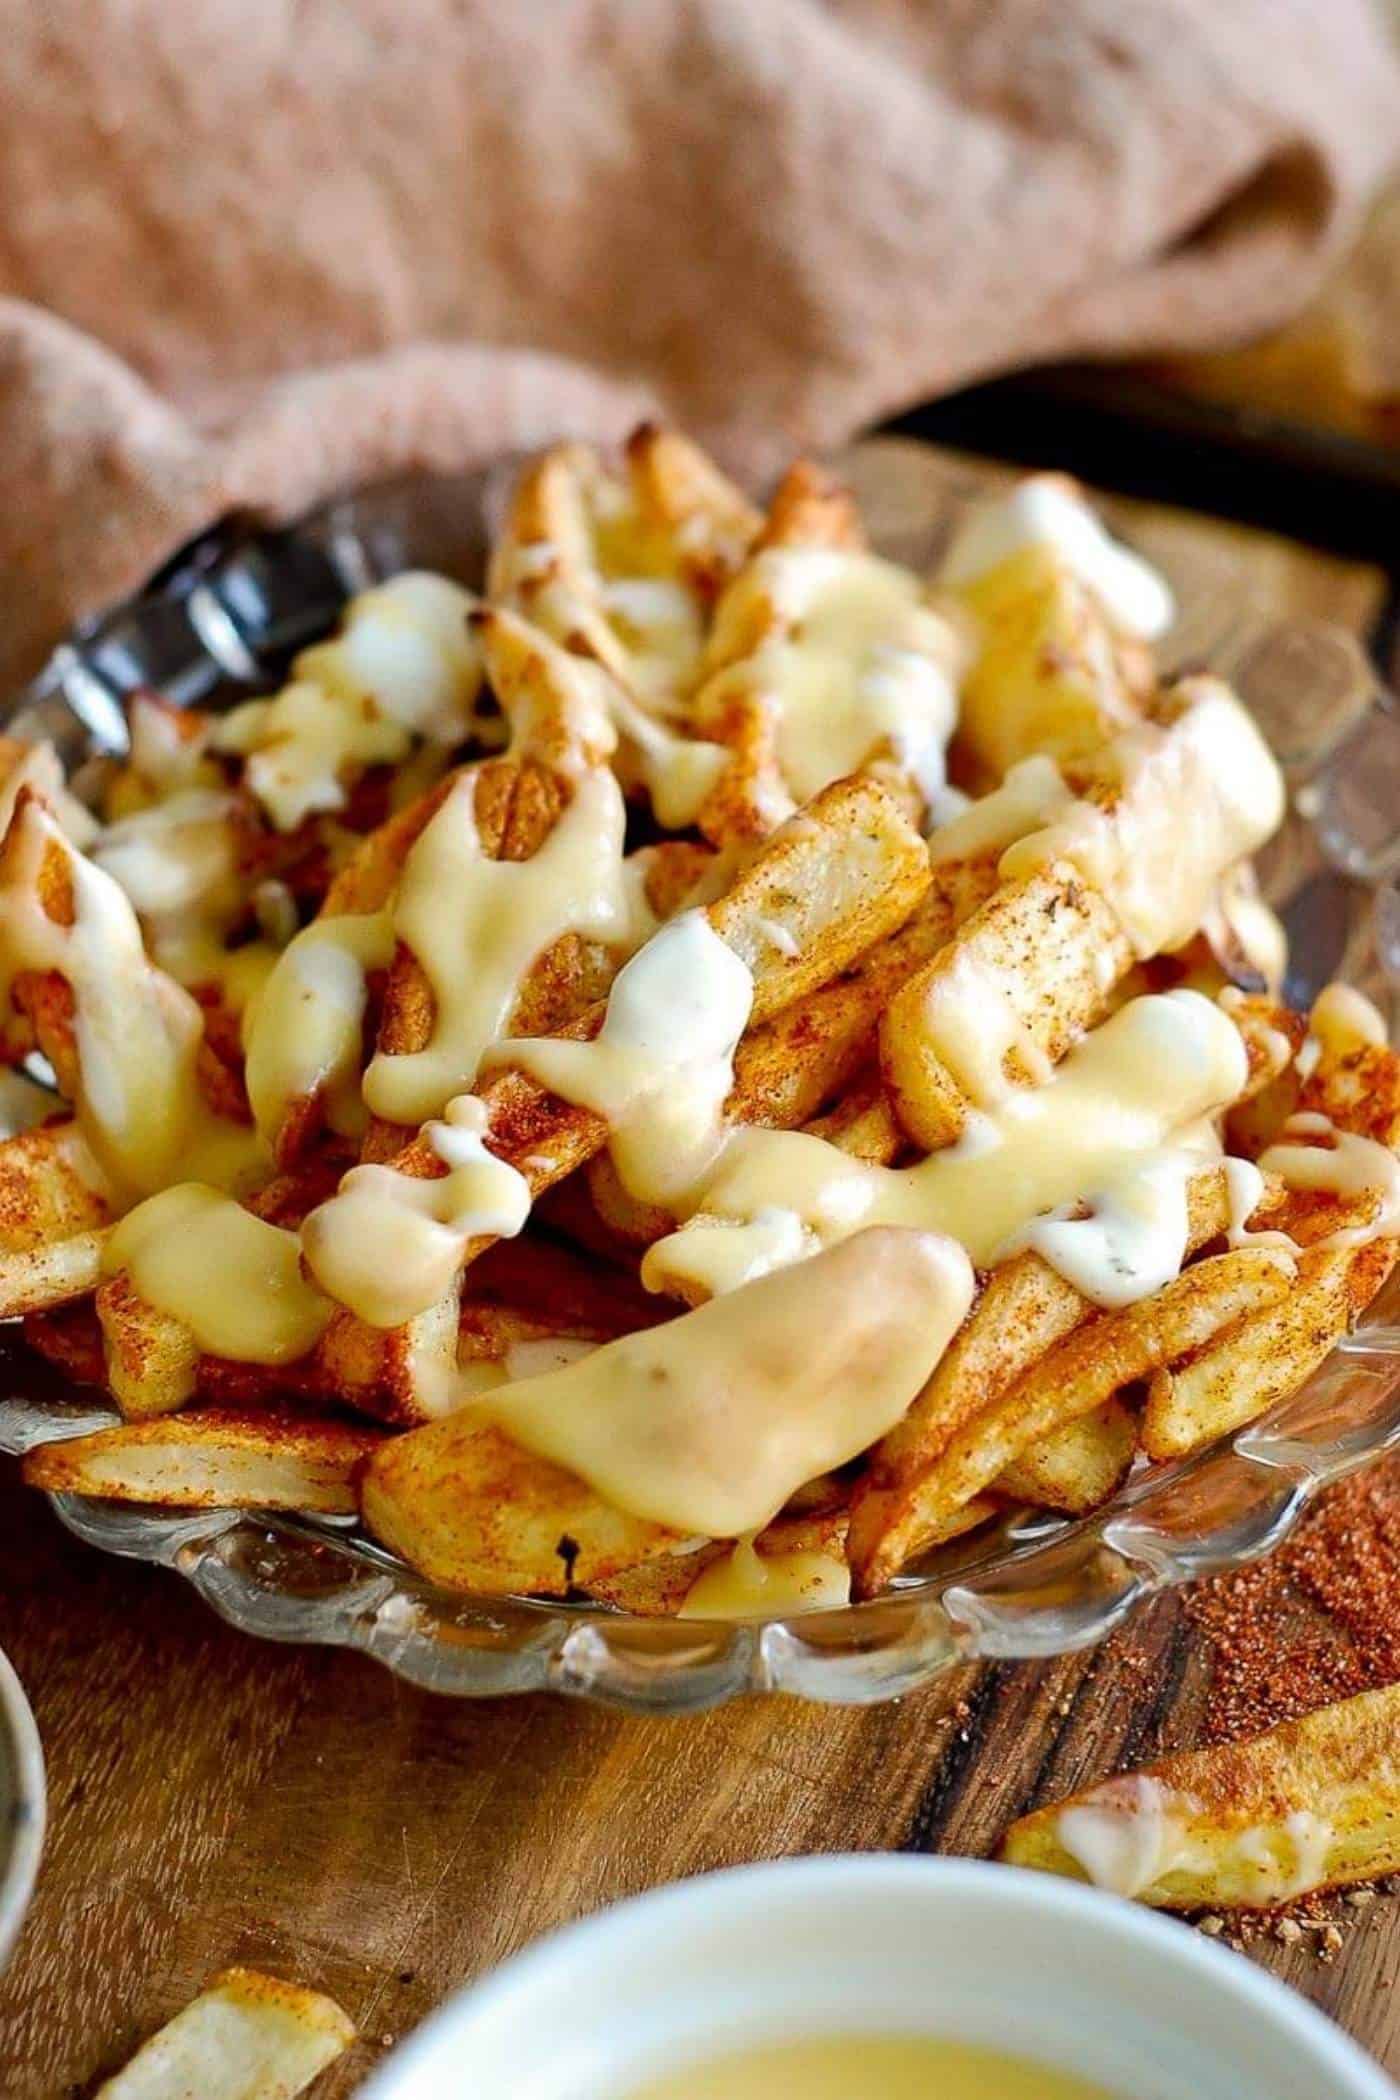 louisiana voodoo fries with cajun seasoning, ranch dressing and cheese sauce on plate.